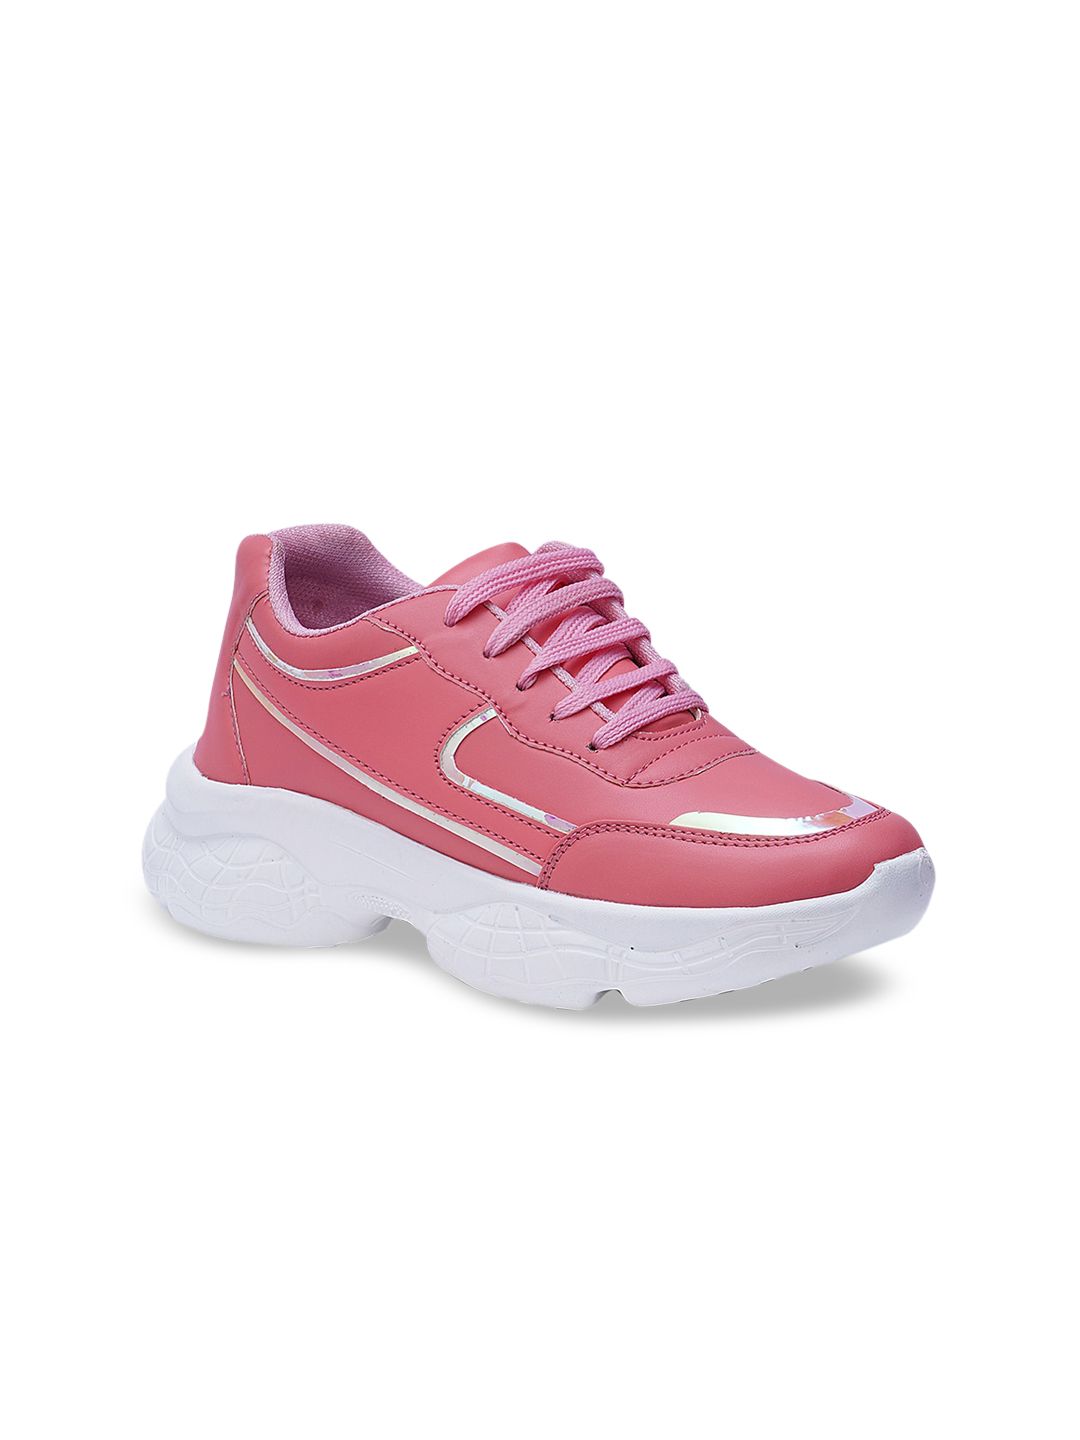 HERE&NOW Women Pink PU Sneakers Price in India